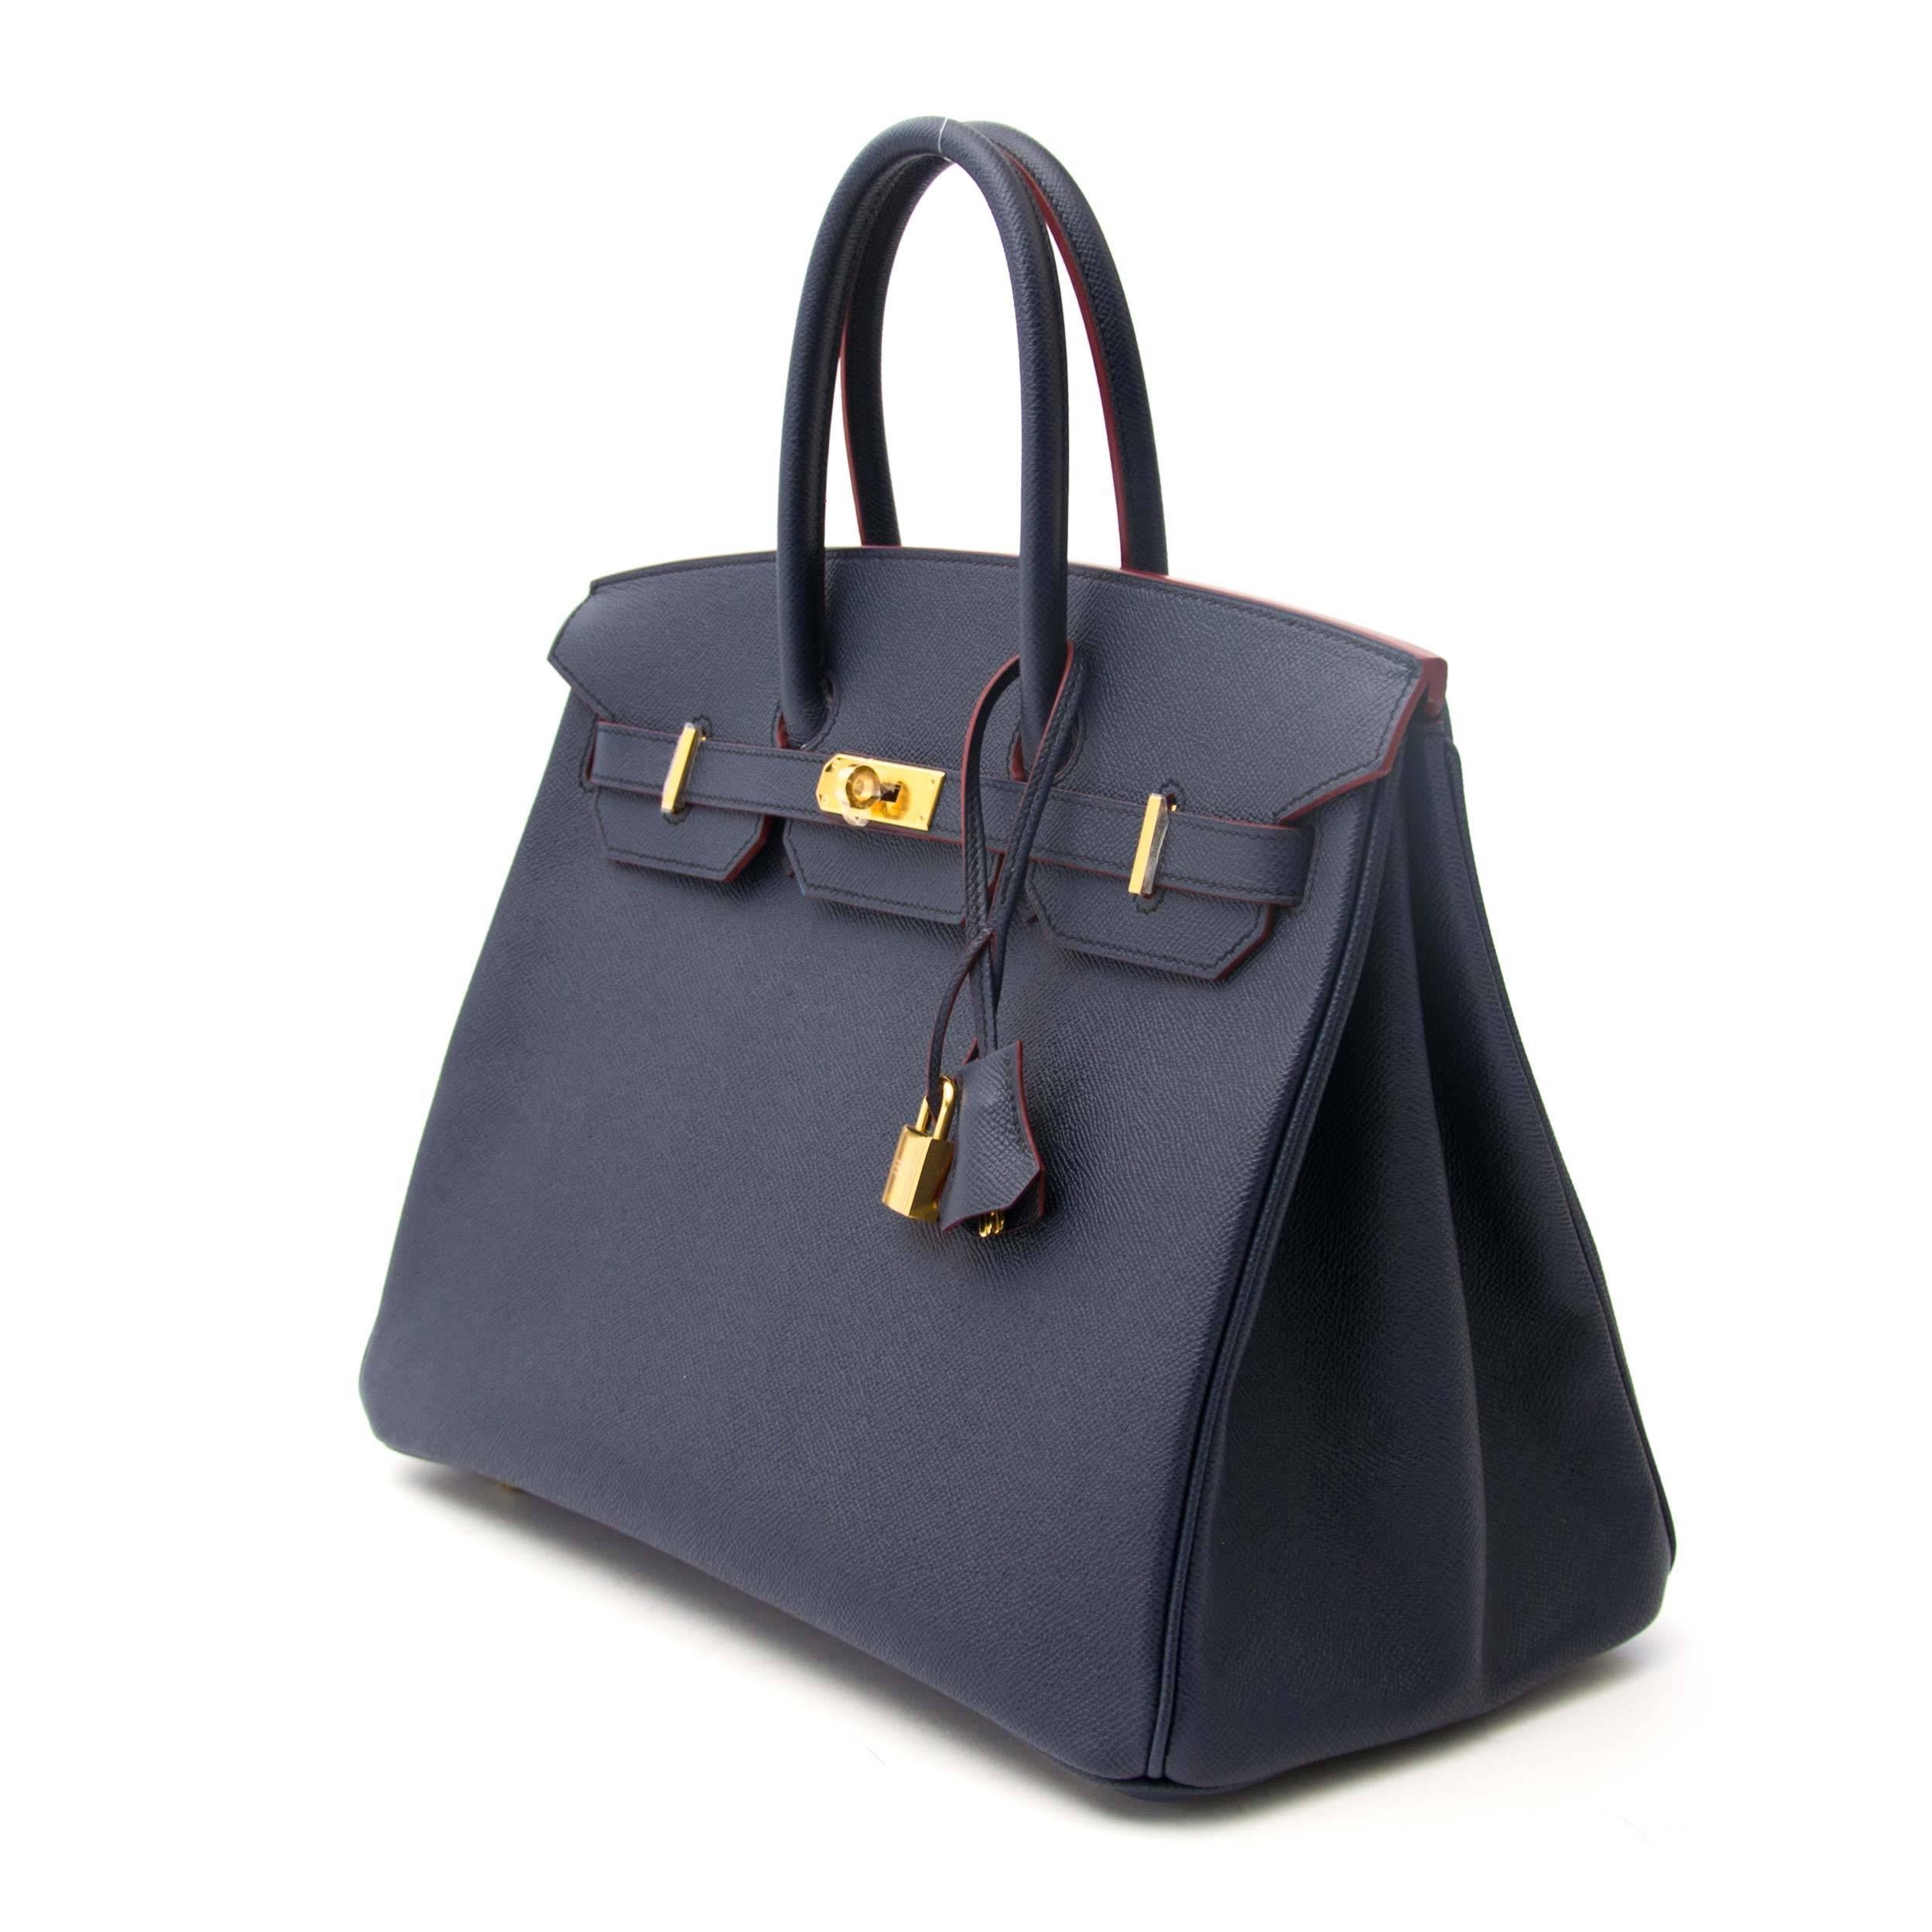 Never Used

Never Used Hermes Birkin Blue Indigo Contour

Hermes Limited contour Blue Indigo Birkin 35 made out of epsom leather with Rouge H contour and silver hardware.
At first sight it looks no different from a standard Birkin bag however closer